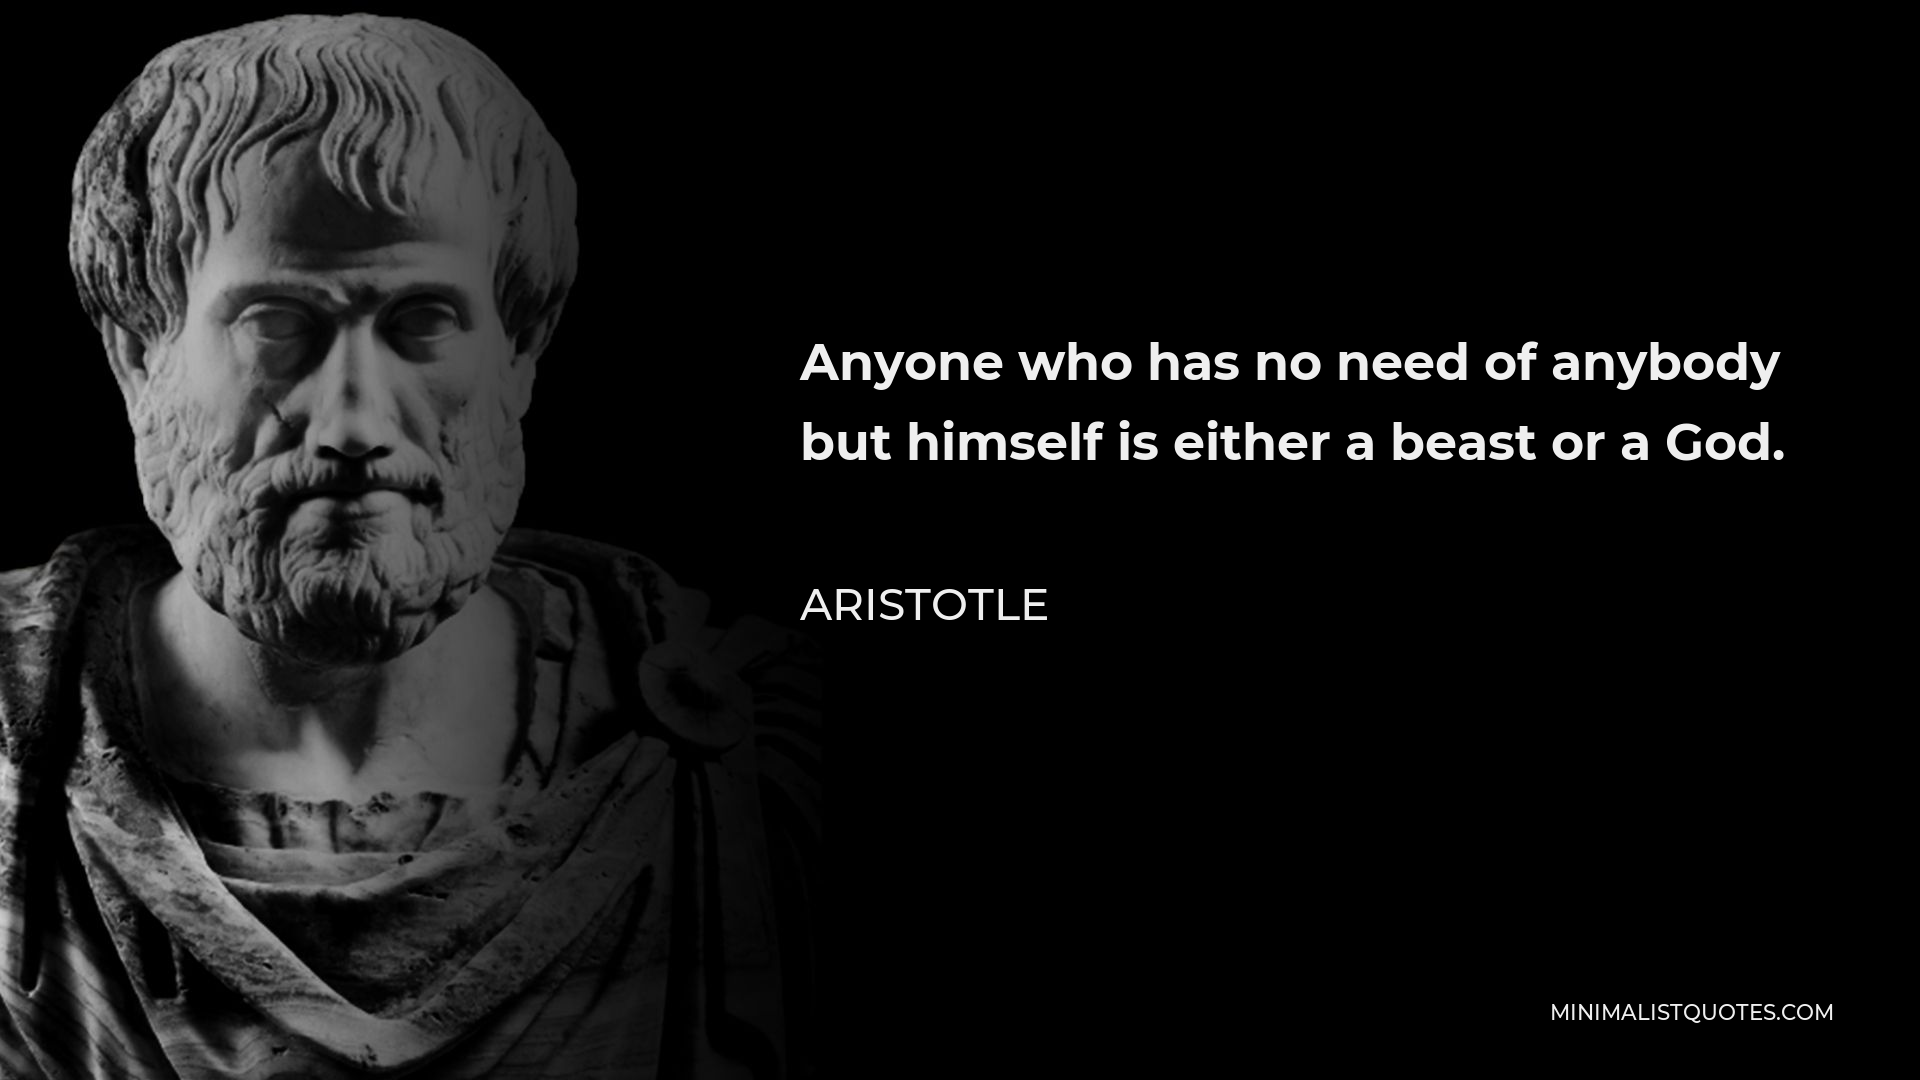 Aristotle Quote - Anyone who has no need of anybody but himself is either a beast or a God.